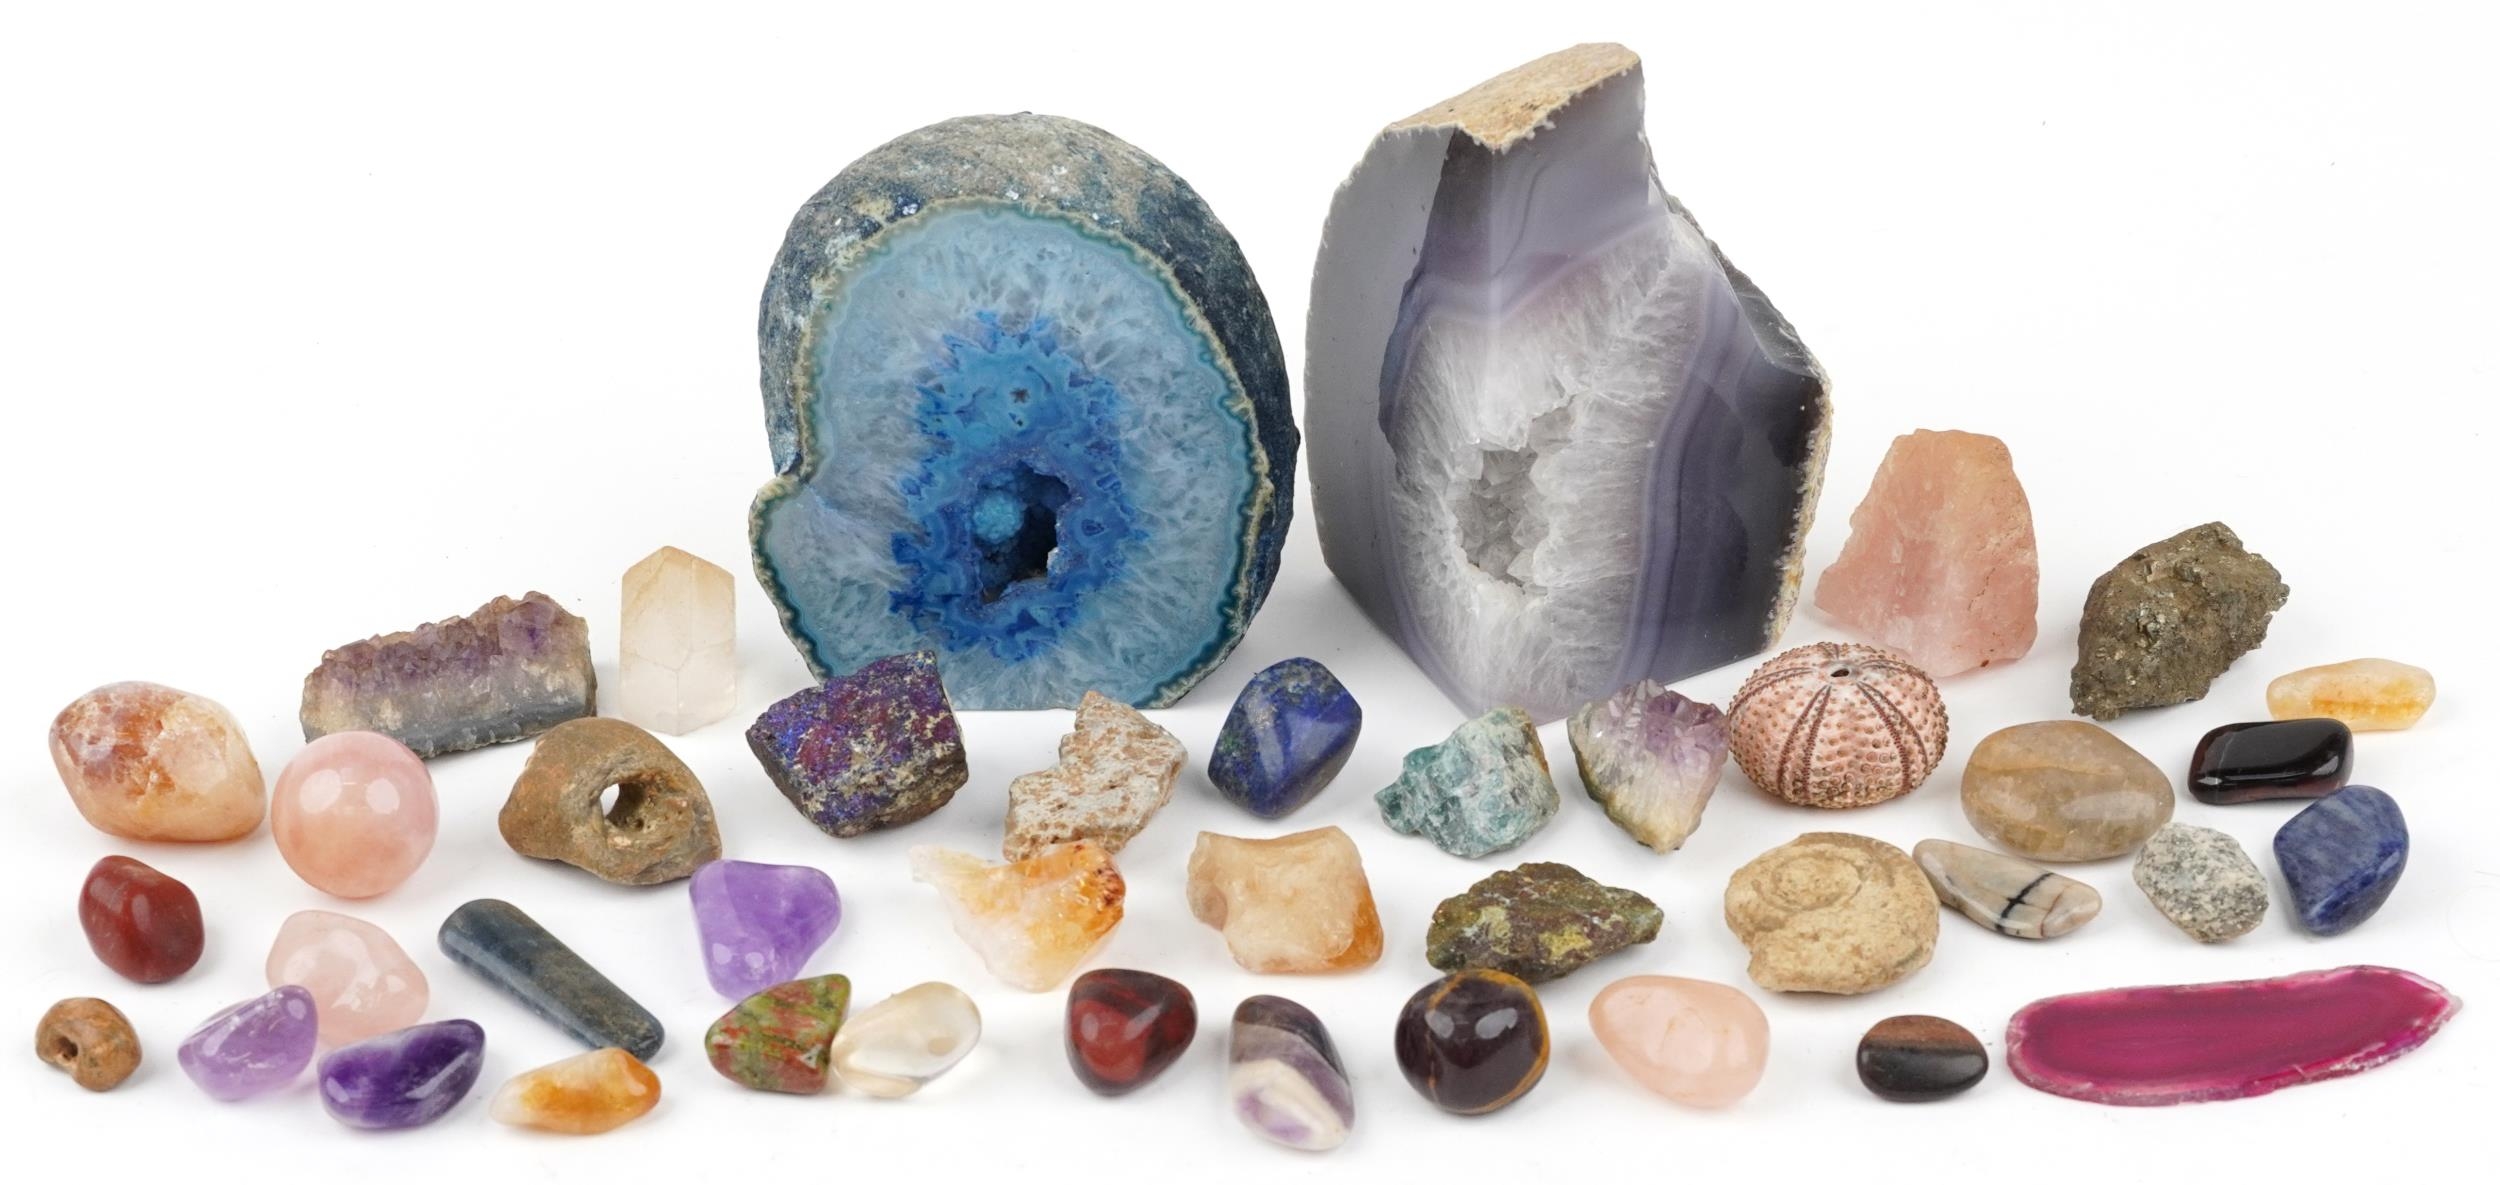 Natural history and geology interest fossils and stone specimens including amethyst, crystal and